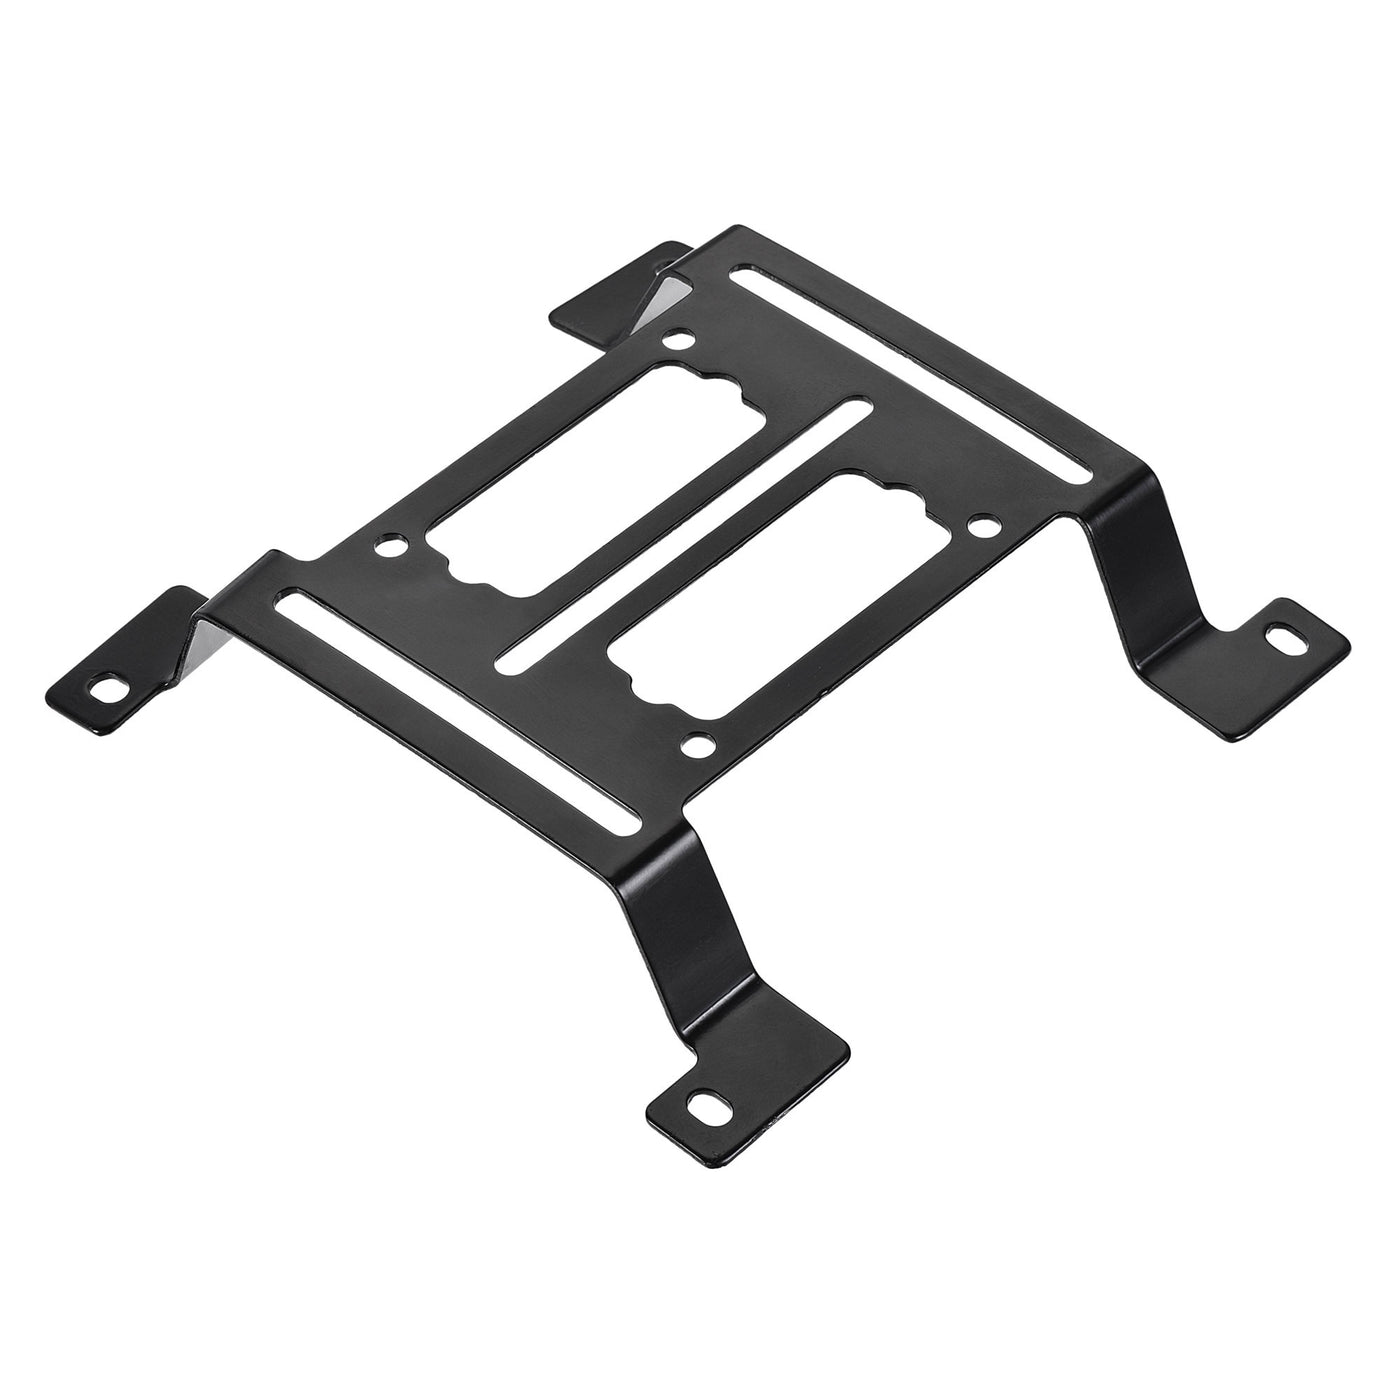 uxcell Uxcell Metal Retention Bracket 115mm x 115mm for Water Cooling Radiator